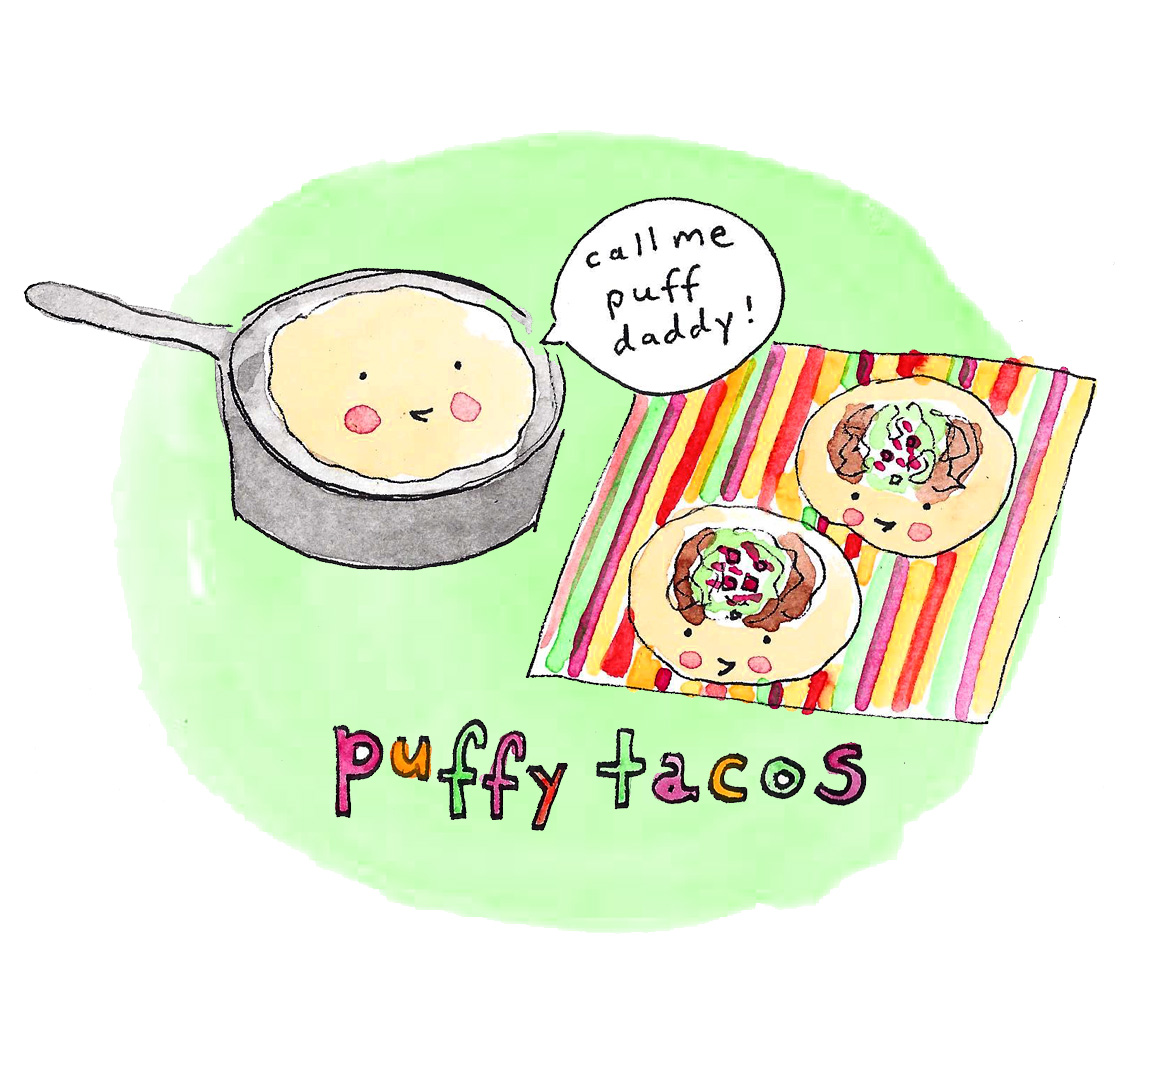 Puffy tacos